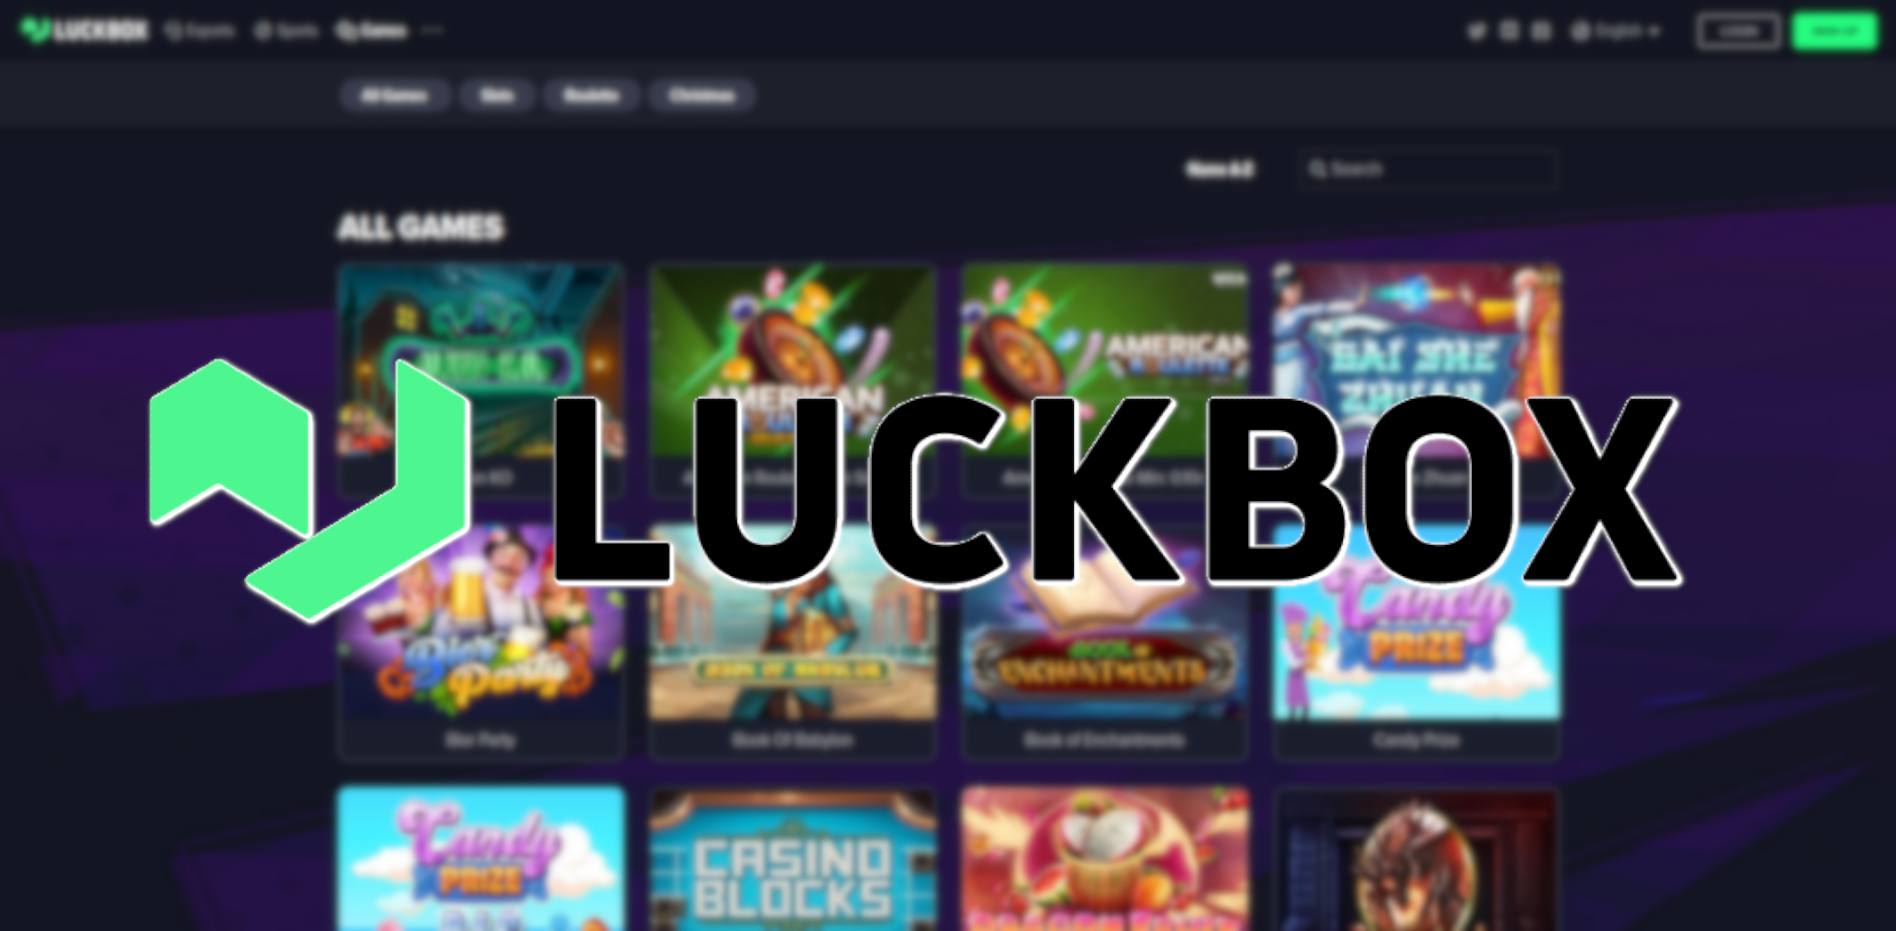 Luckbox Casino Launches on Top Esports Betting Site